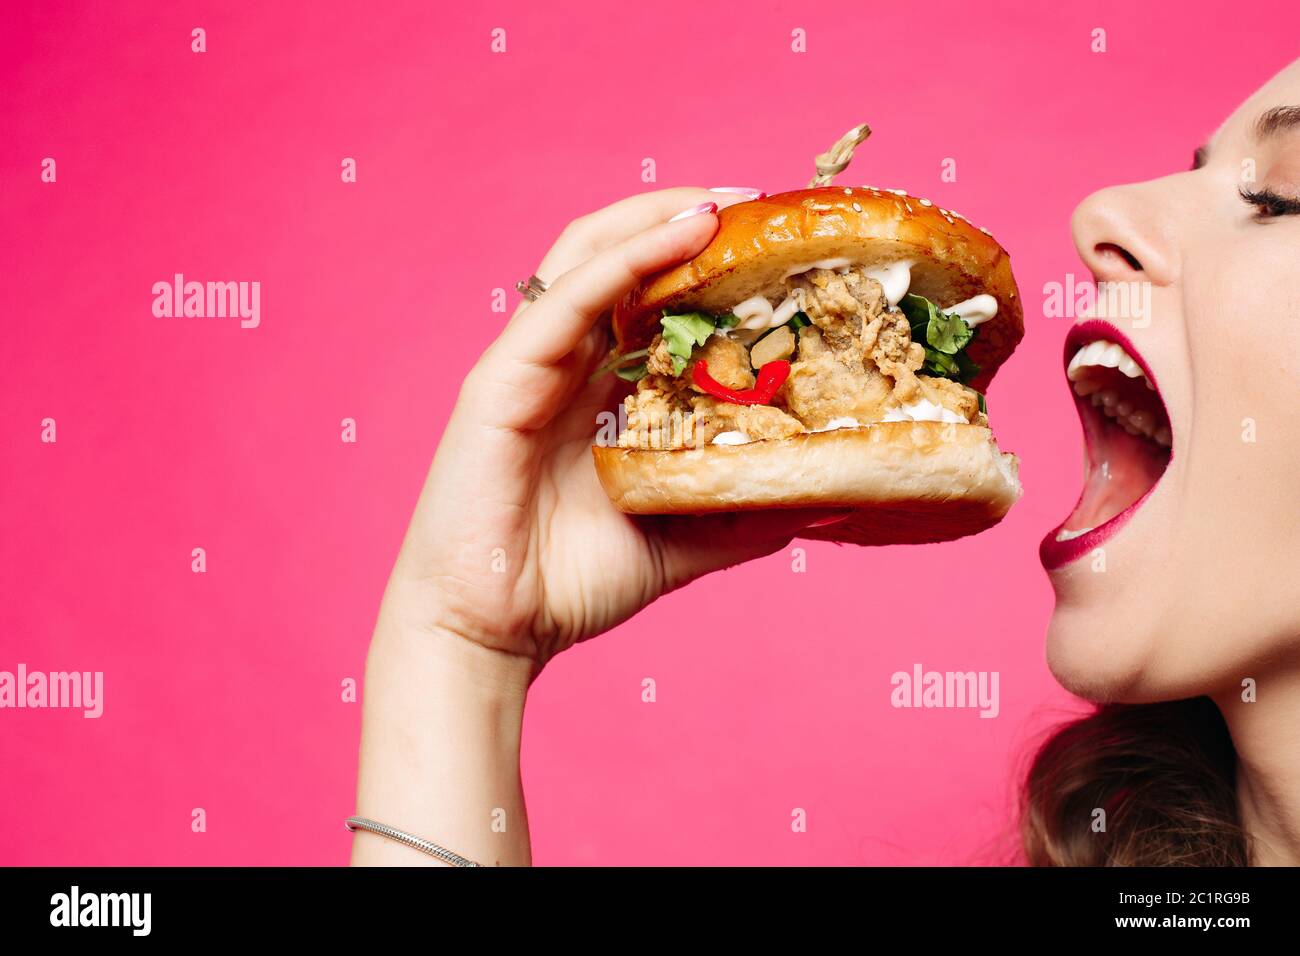 Woman eating sandwich. The happy girl is eating a hamburger. She opened her mouth, holding a hamburger in her right hand and loo Stock Photo